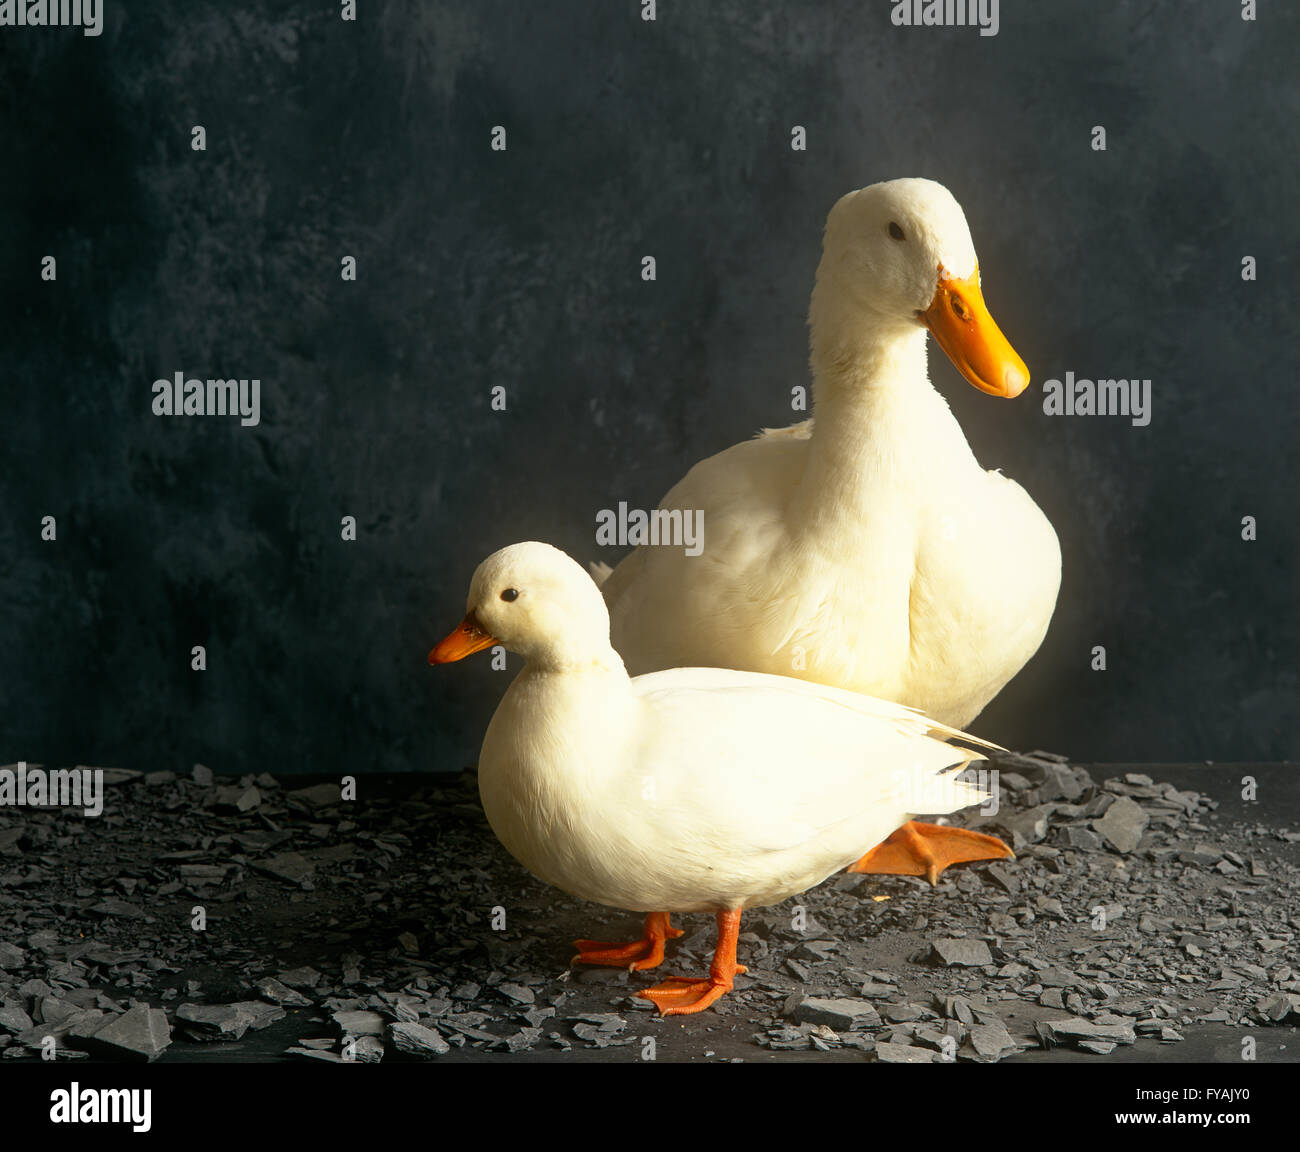 Two ducks together, inside. Stock Photo